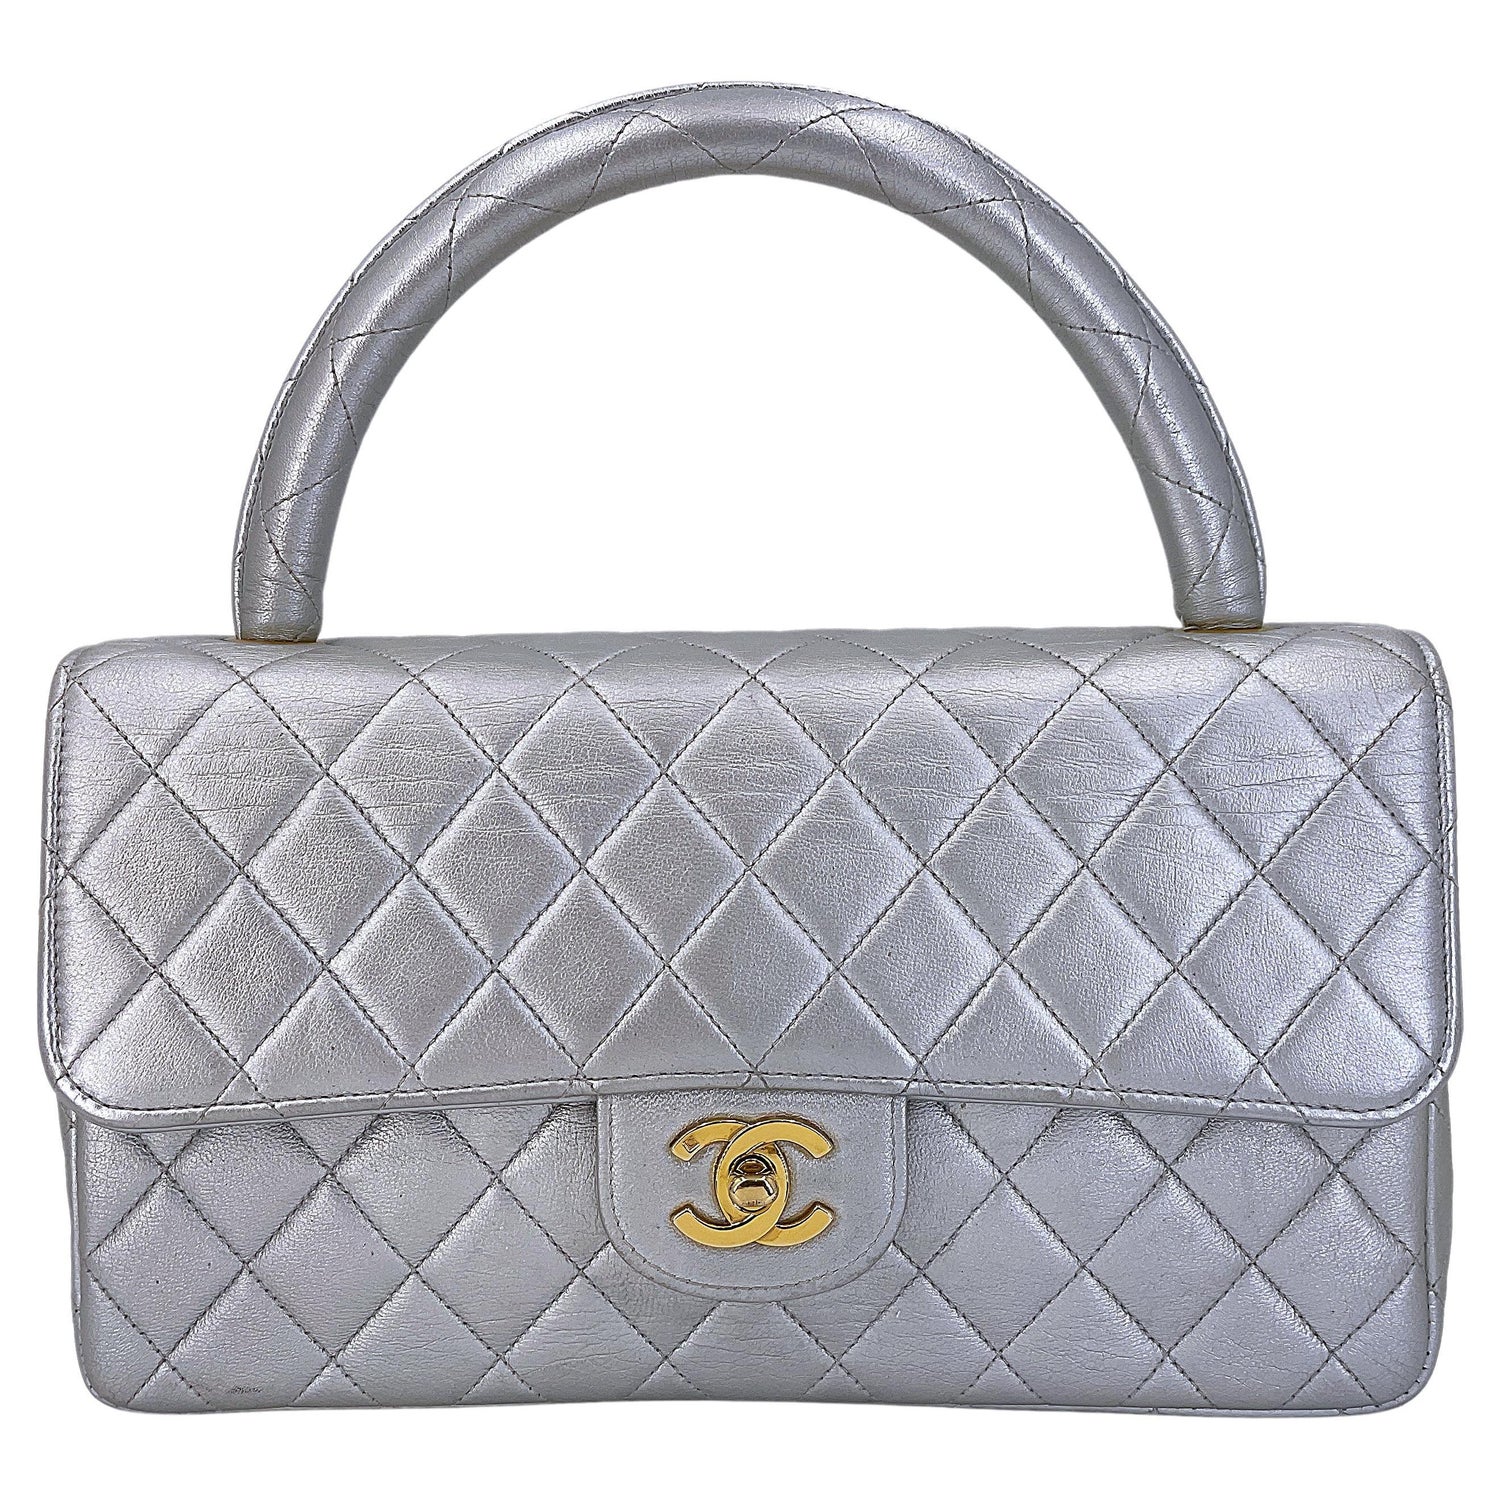 Chanel Mini Kelly Top Handle Bag - 9 For Sale on 1stDibs  chanel mini  kelly bag, chanel kelly top handle bag, mini kelly bag chanel